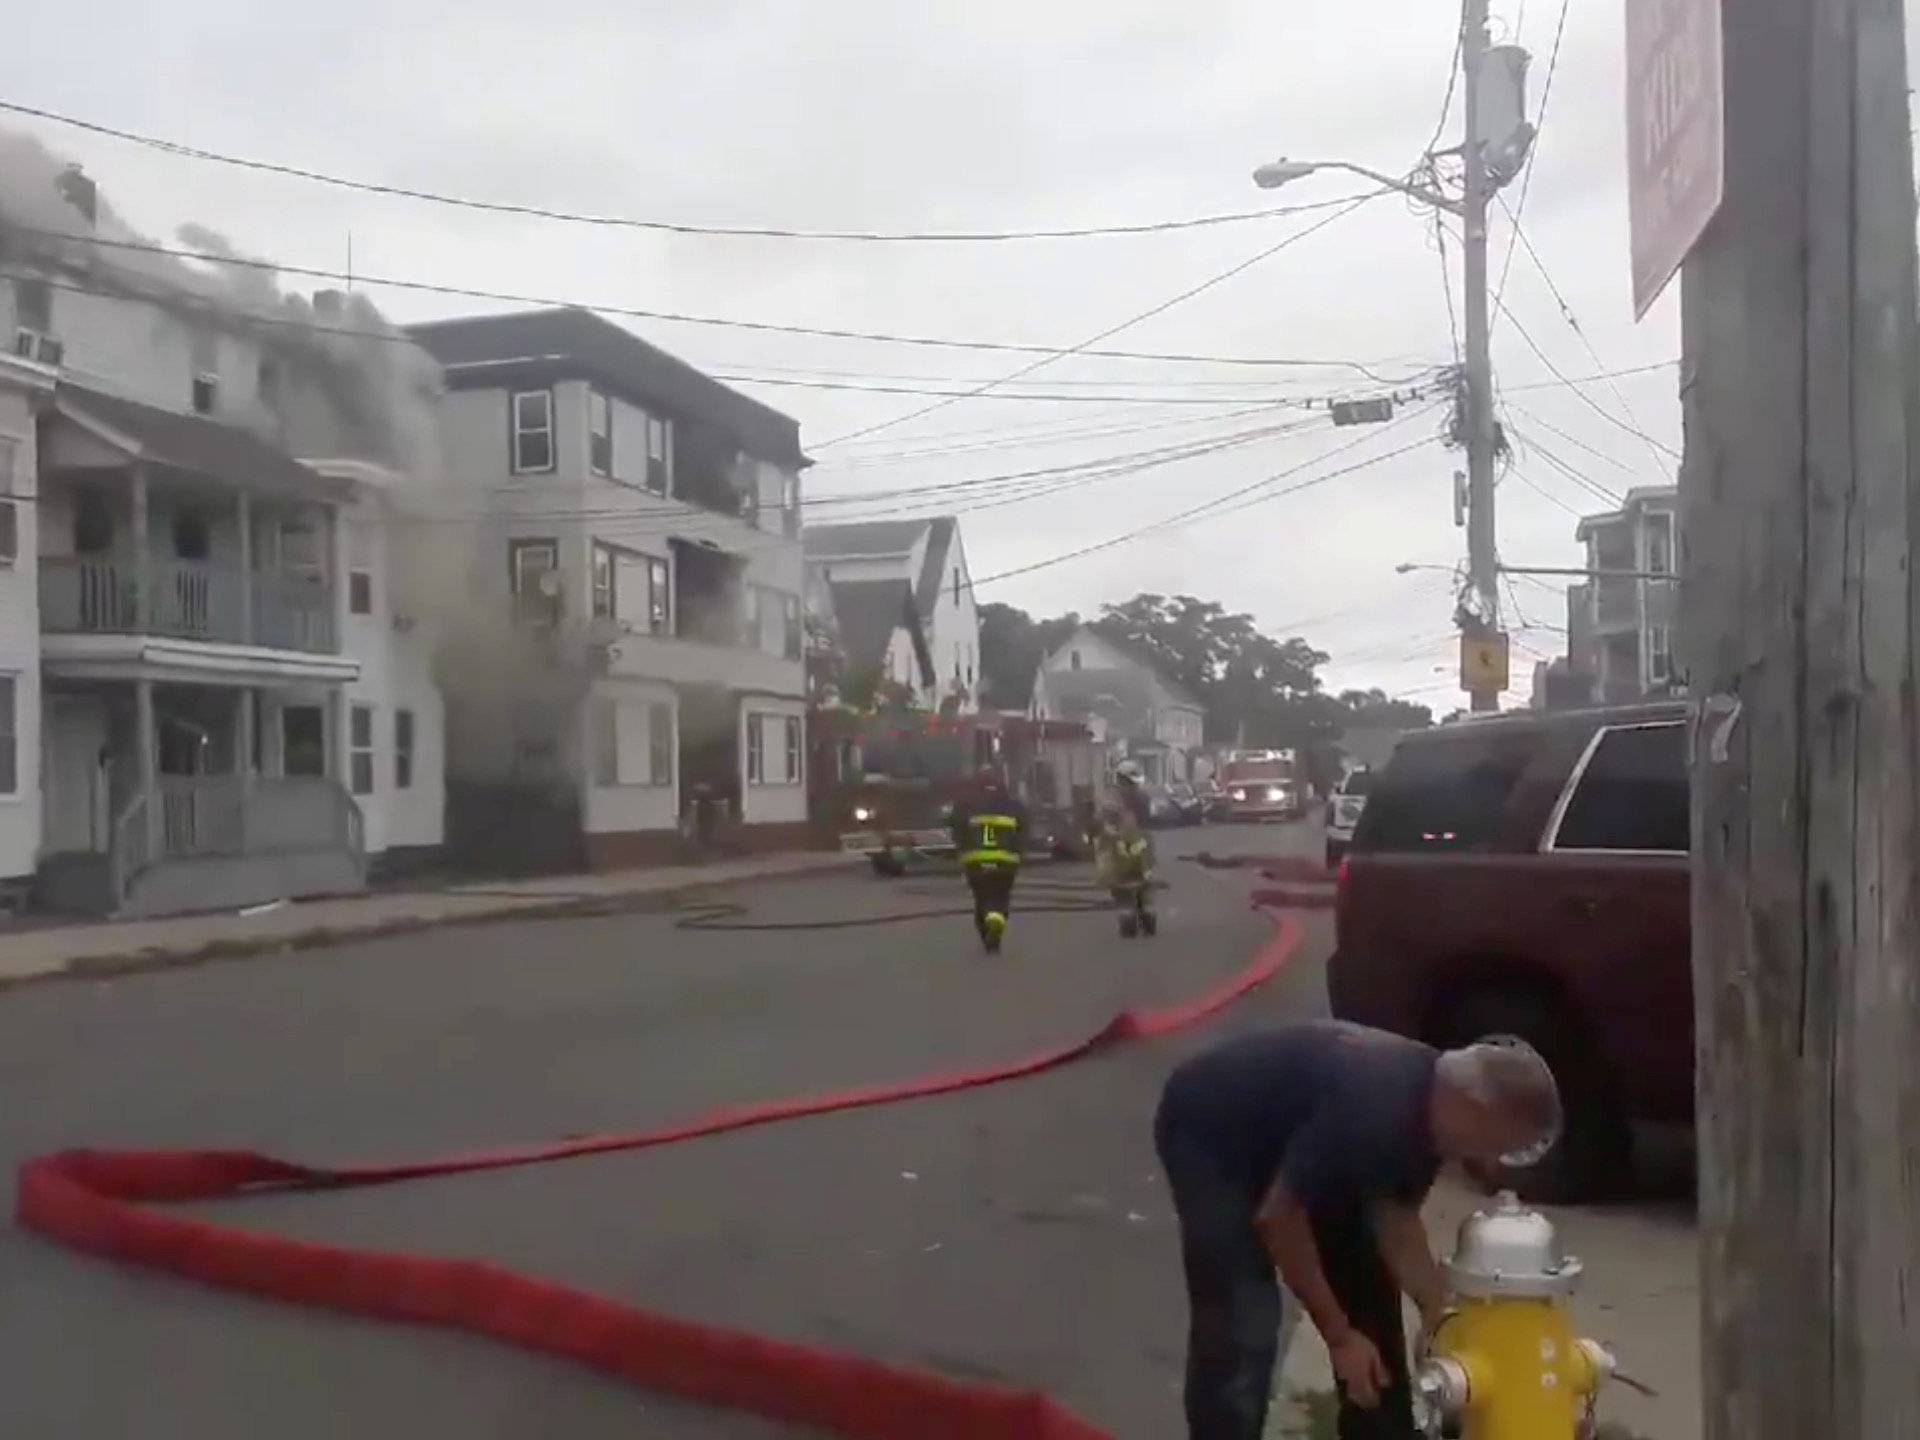 Still image from social media video footage by Boston Sparks shows firefighters working near a building emitting smoke after explosions in Lawrence, Massachusetts